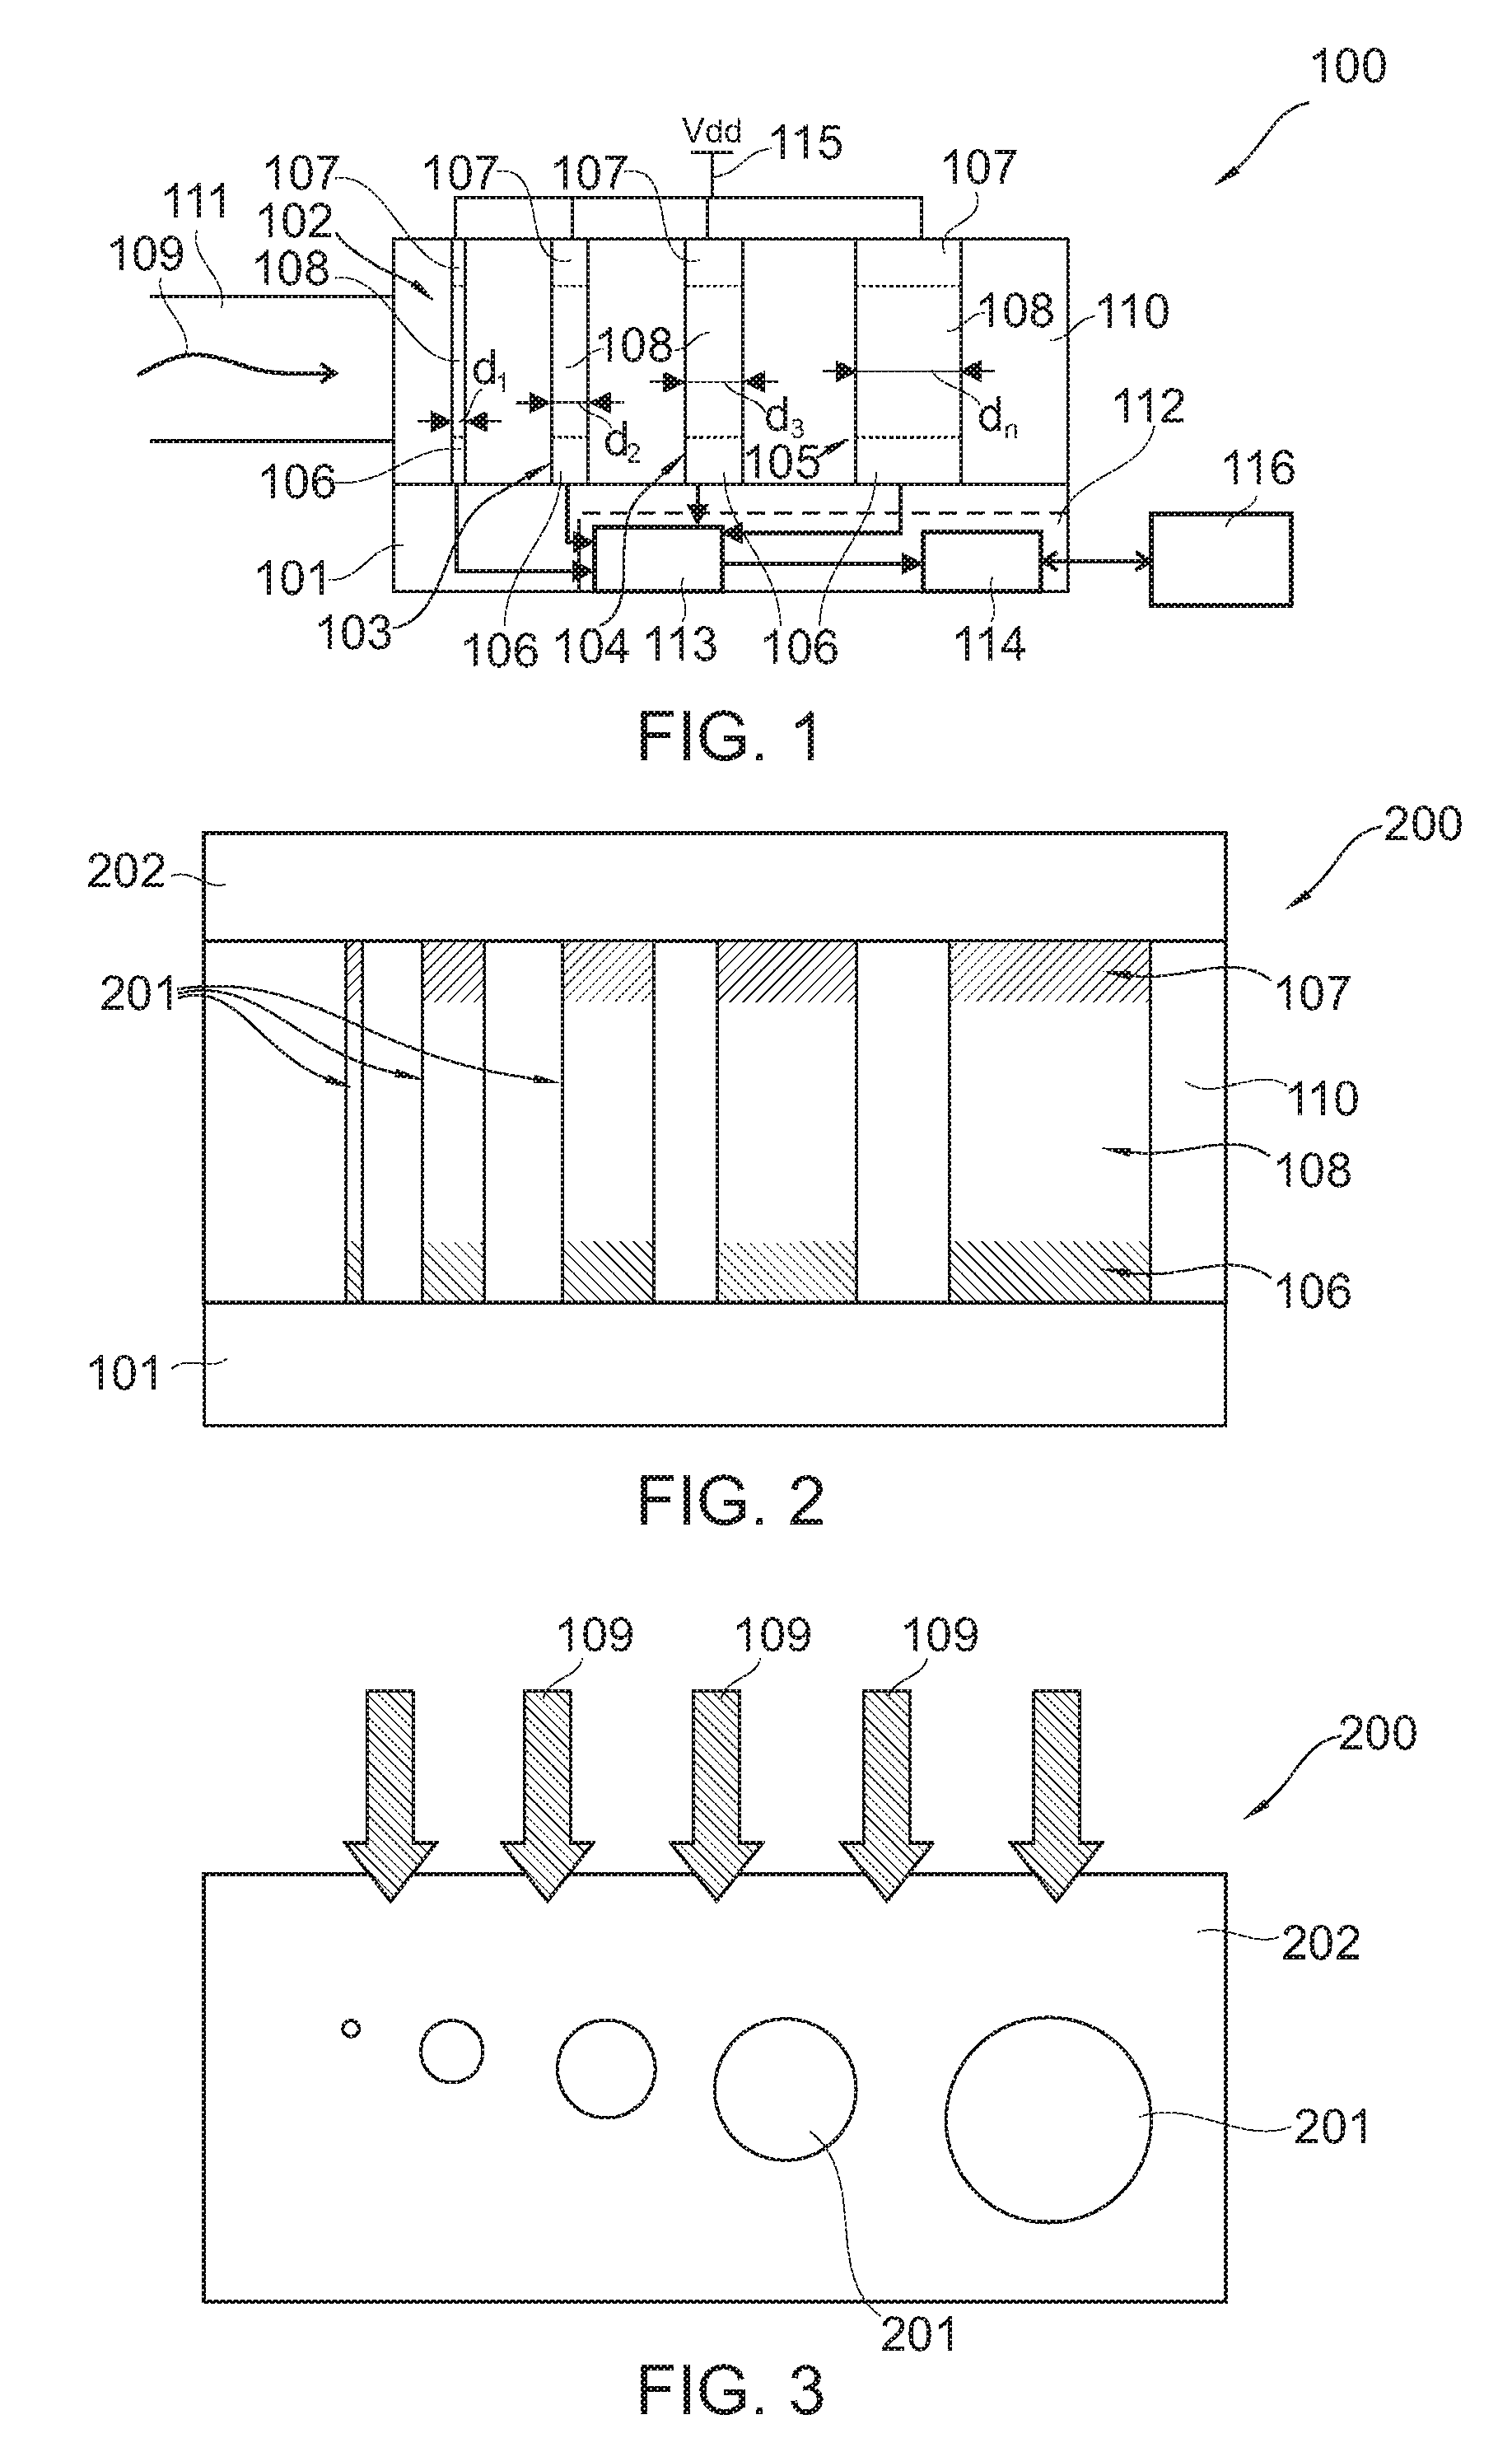 Photosensitive device and method of manufacturing a photosensitive device using nanowire diodes